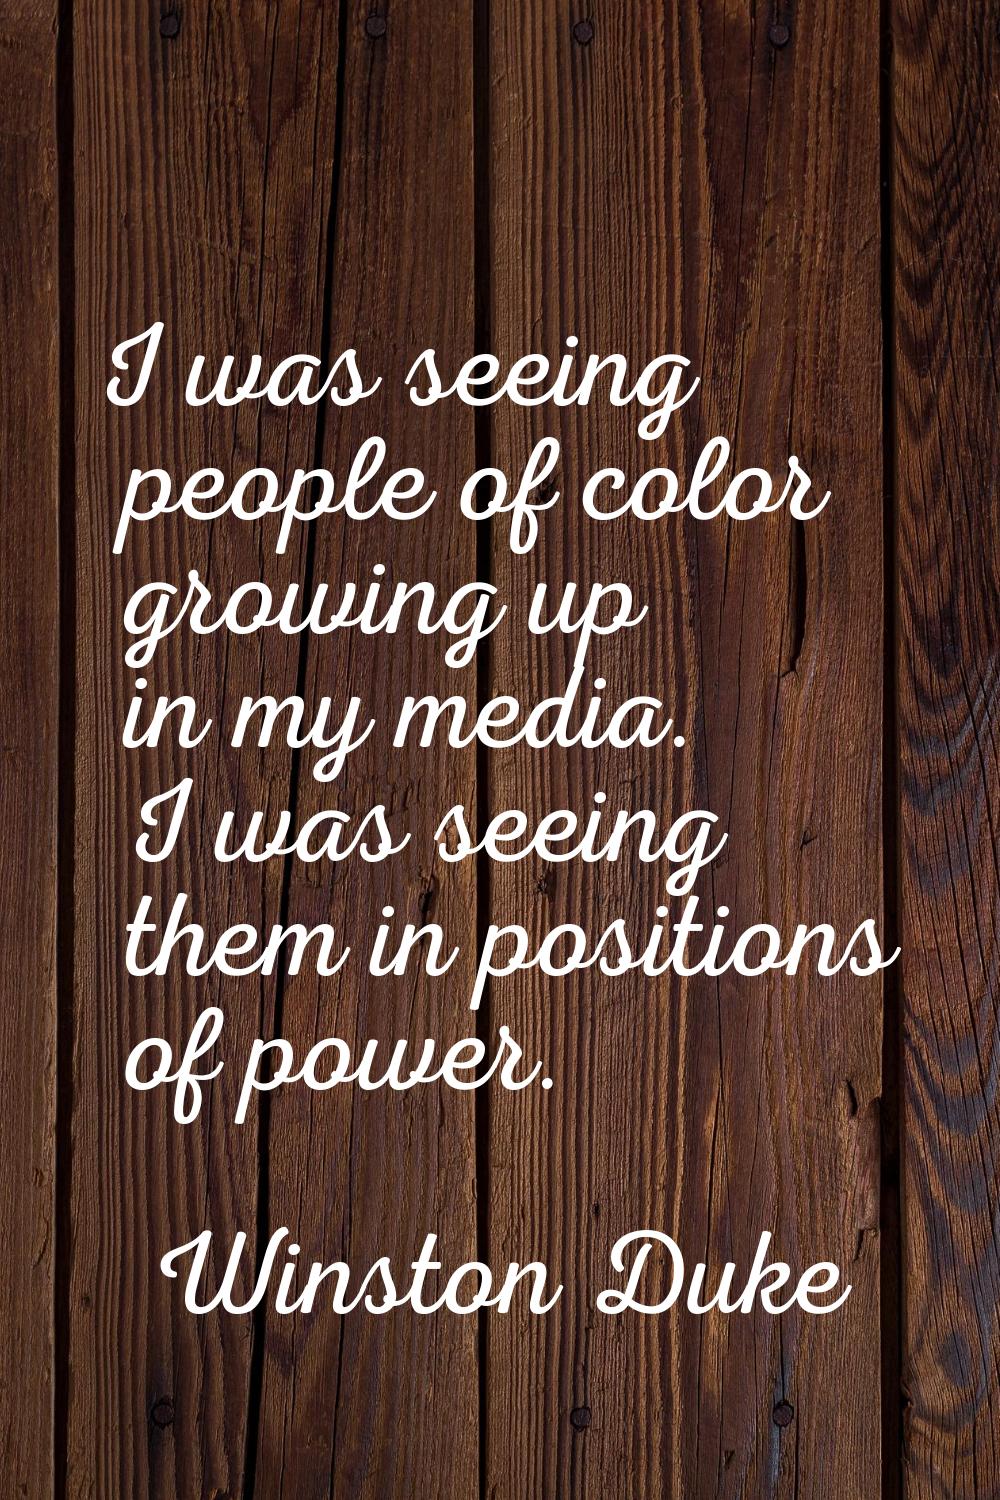 I was seeing people of color growing up in my media. I was seeing them in positions of power.